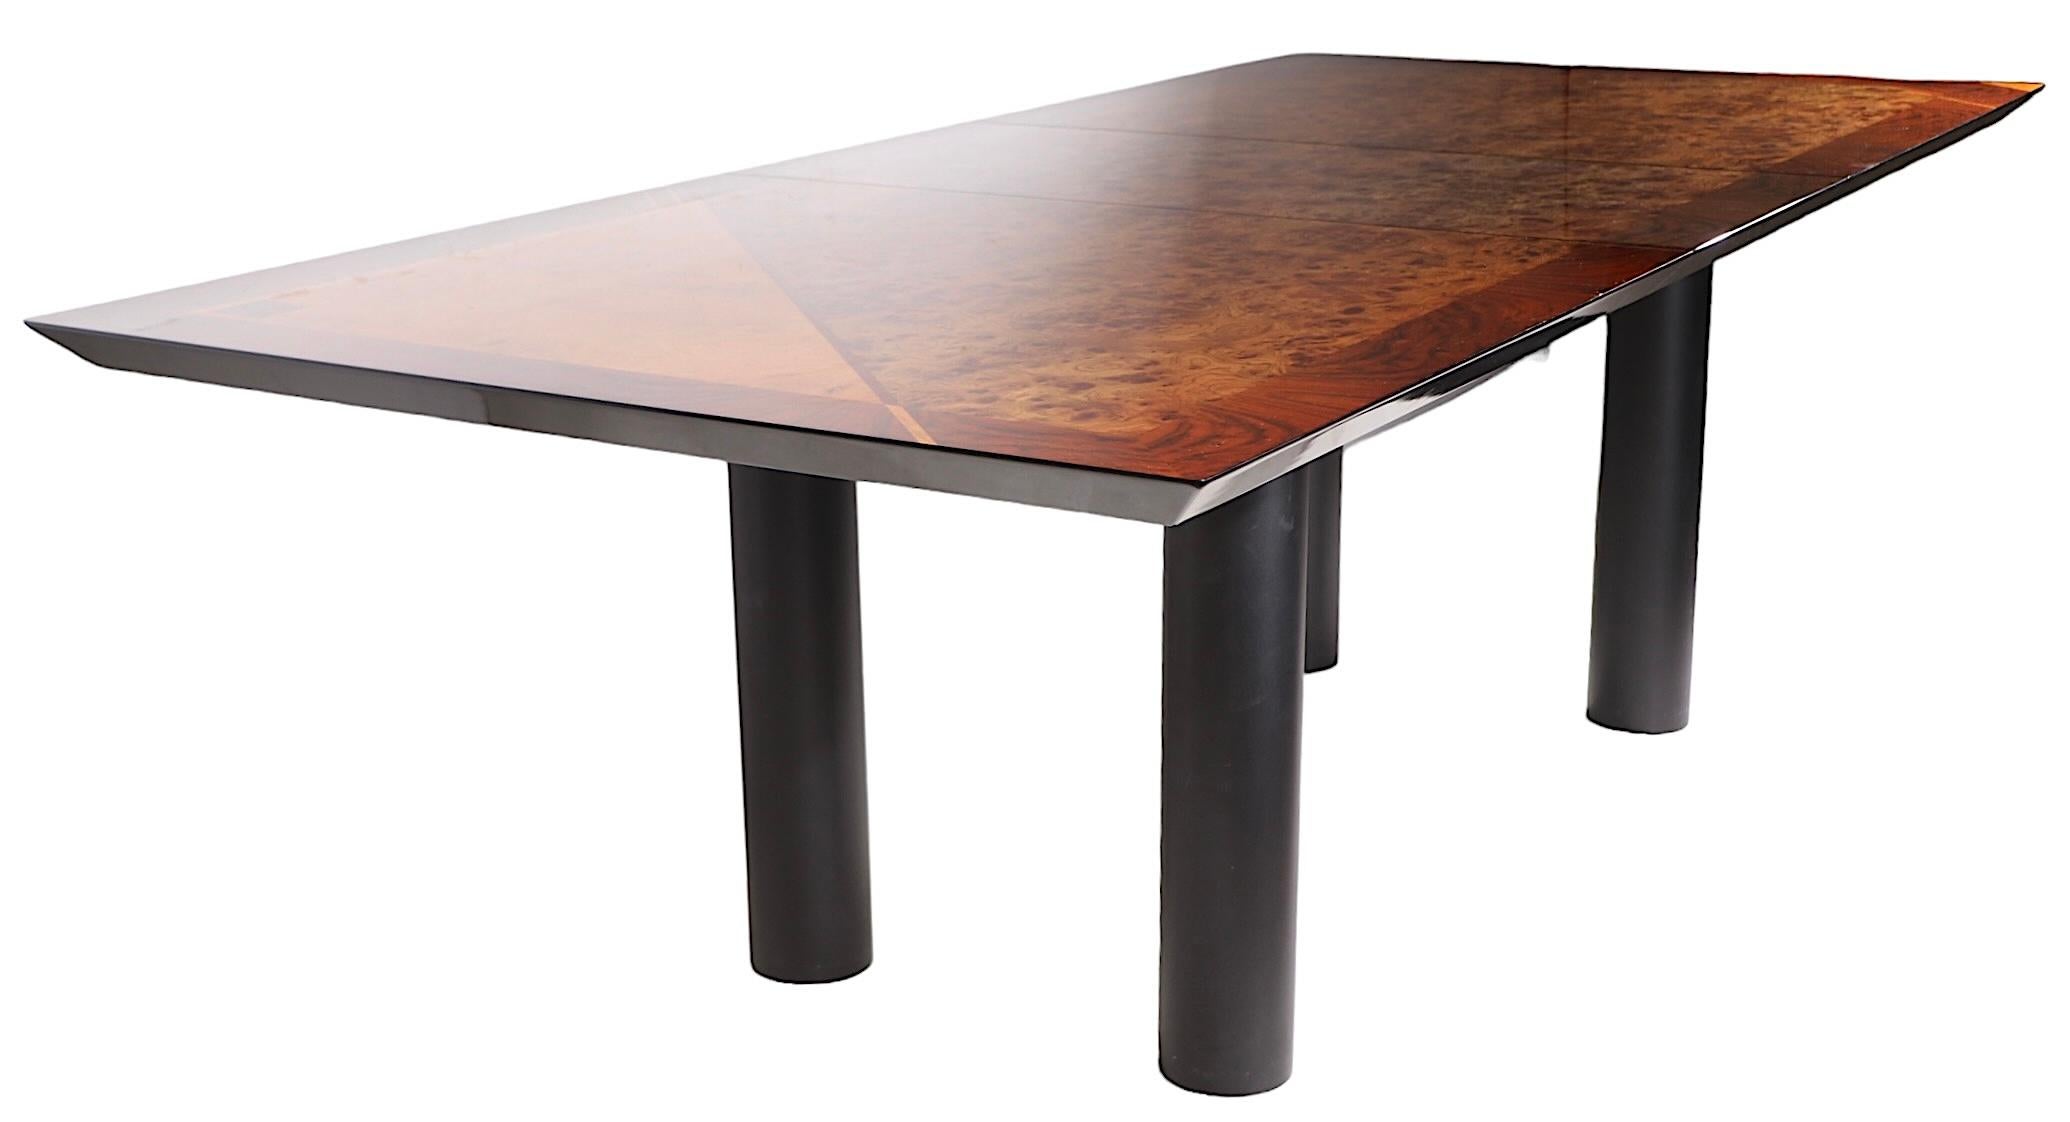 Italian Post Modern Dining Table by Oscar Dell Arredamento for Miniforms c 1970s For Sale 12